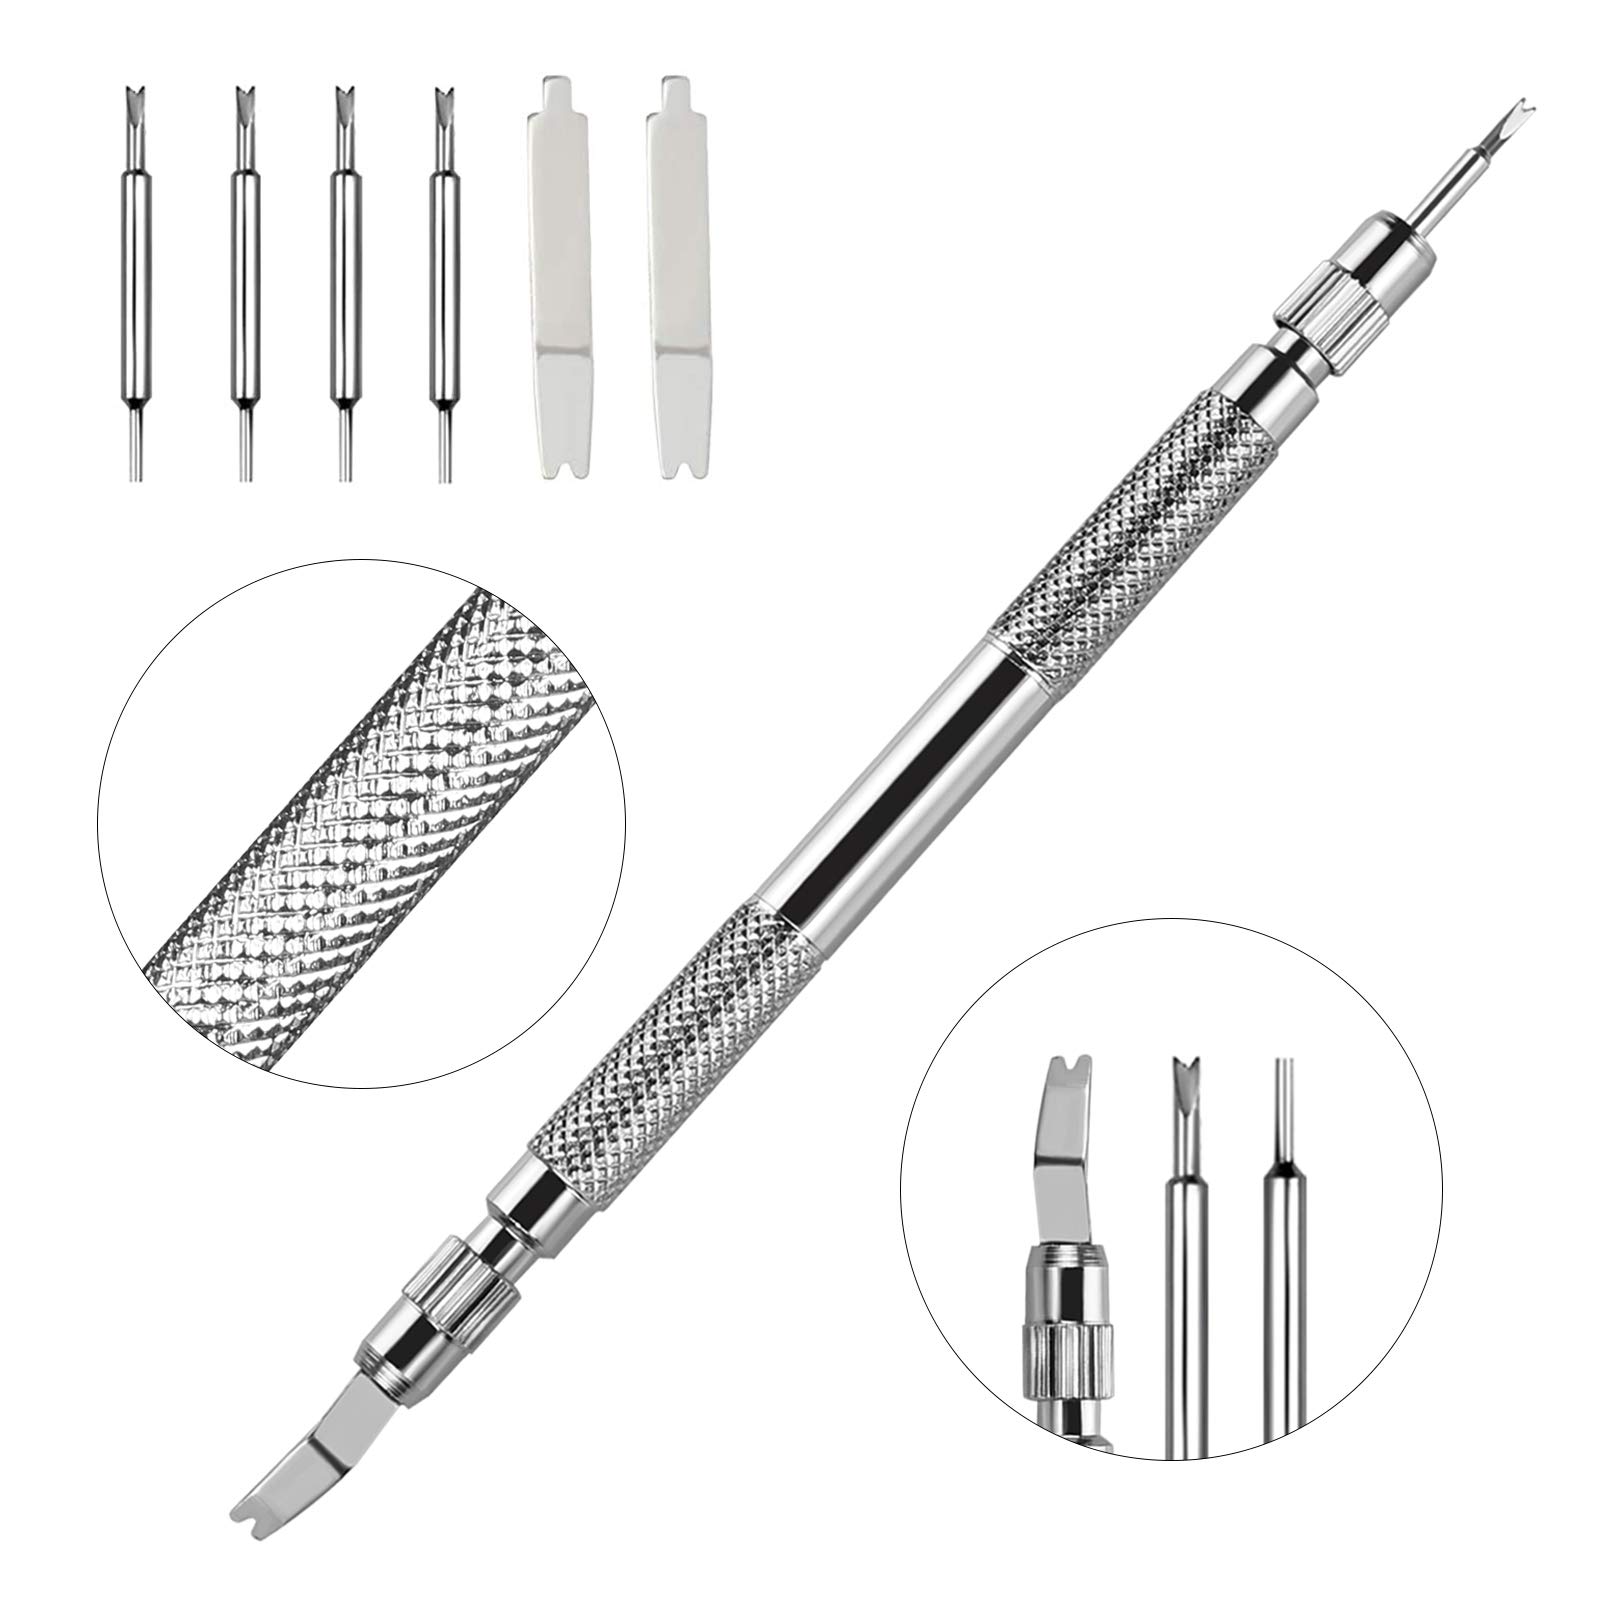 EFIXTK Spring Bar Tool,Watch Band Tool Set, Watch Wrist Bands Strap Removal Repair Fix Kit with 3 Extra Tips Pins & Heavy Duty 316 Stainless Steel Pins